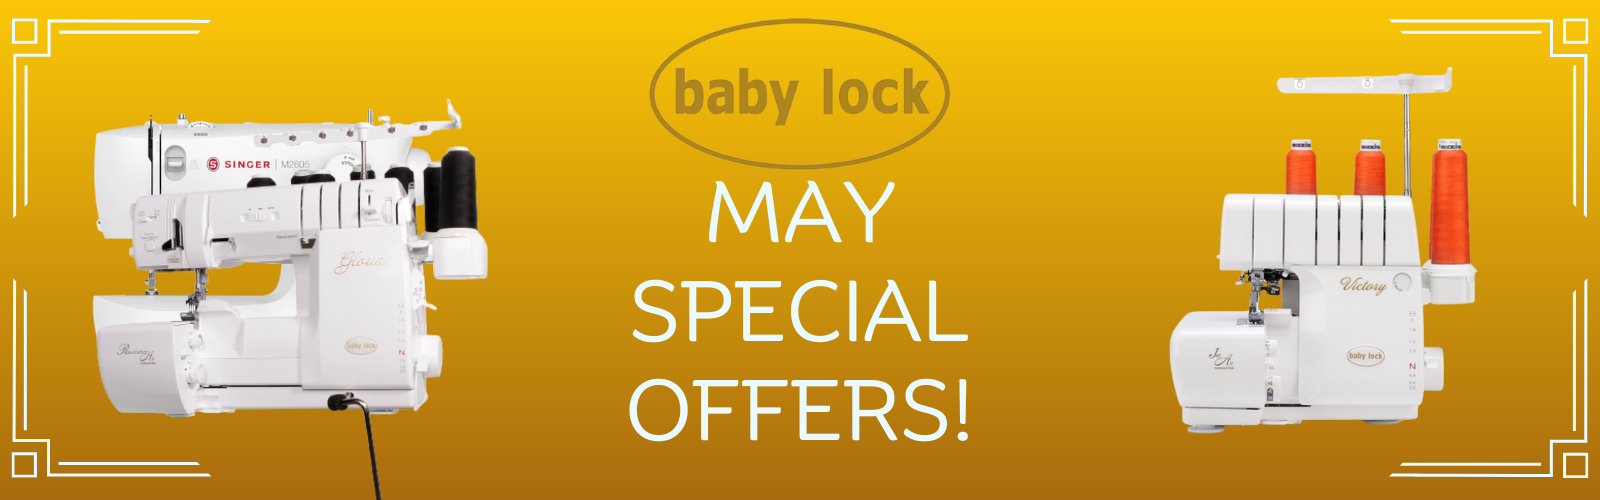 Baby Lock Overlockers and Cover Stitch May Offers - Sewing Direct